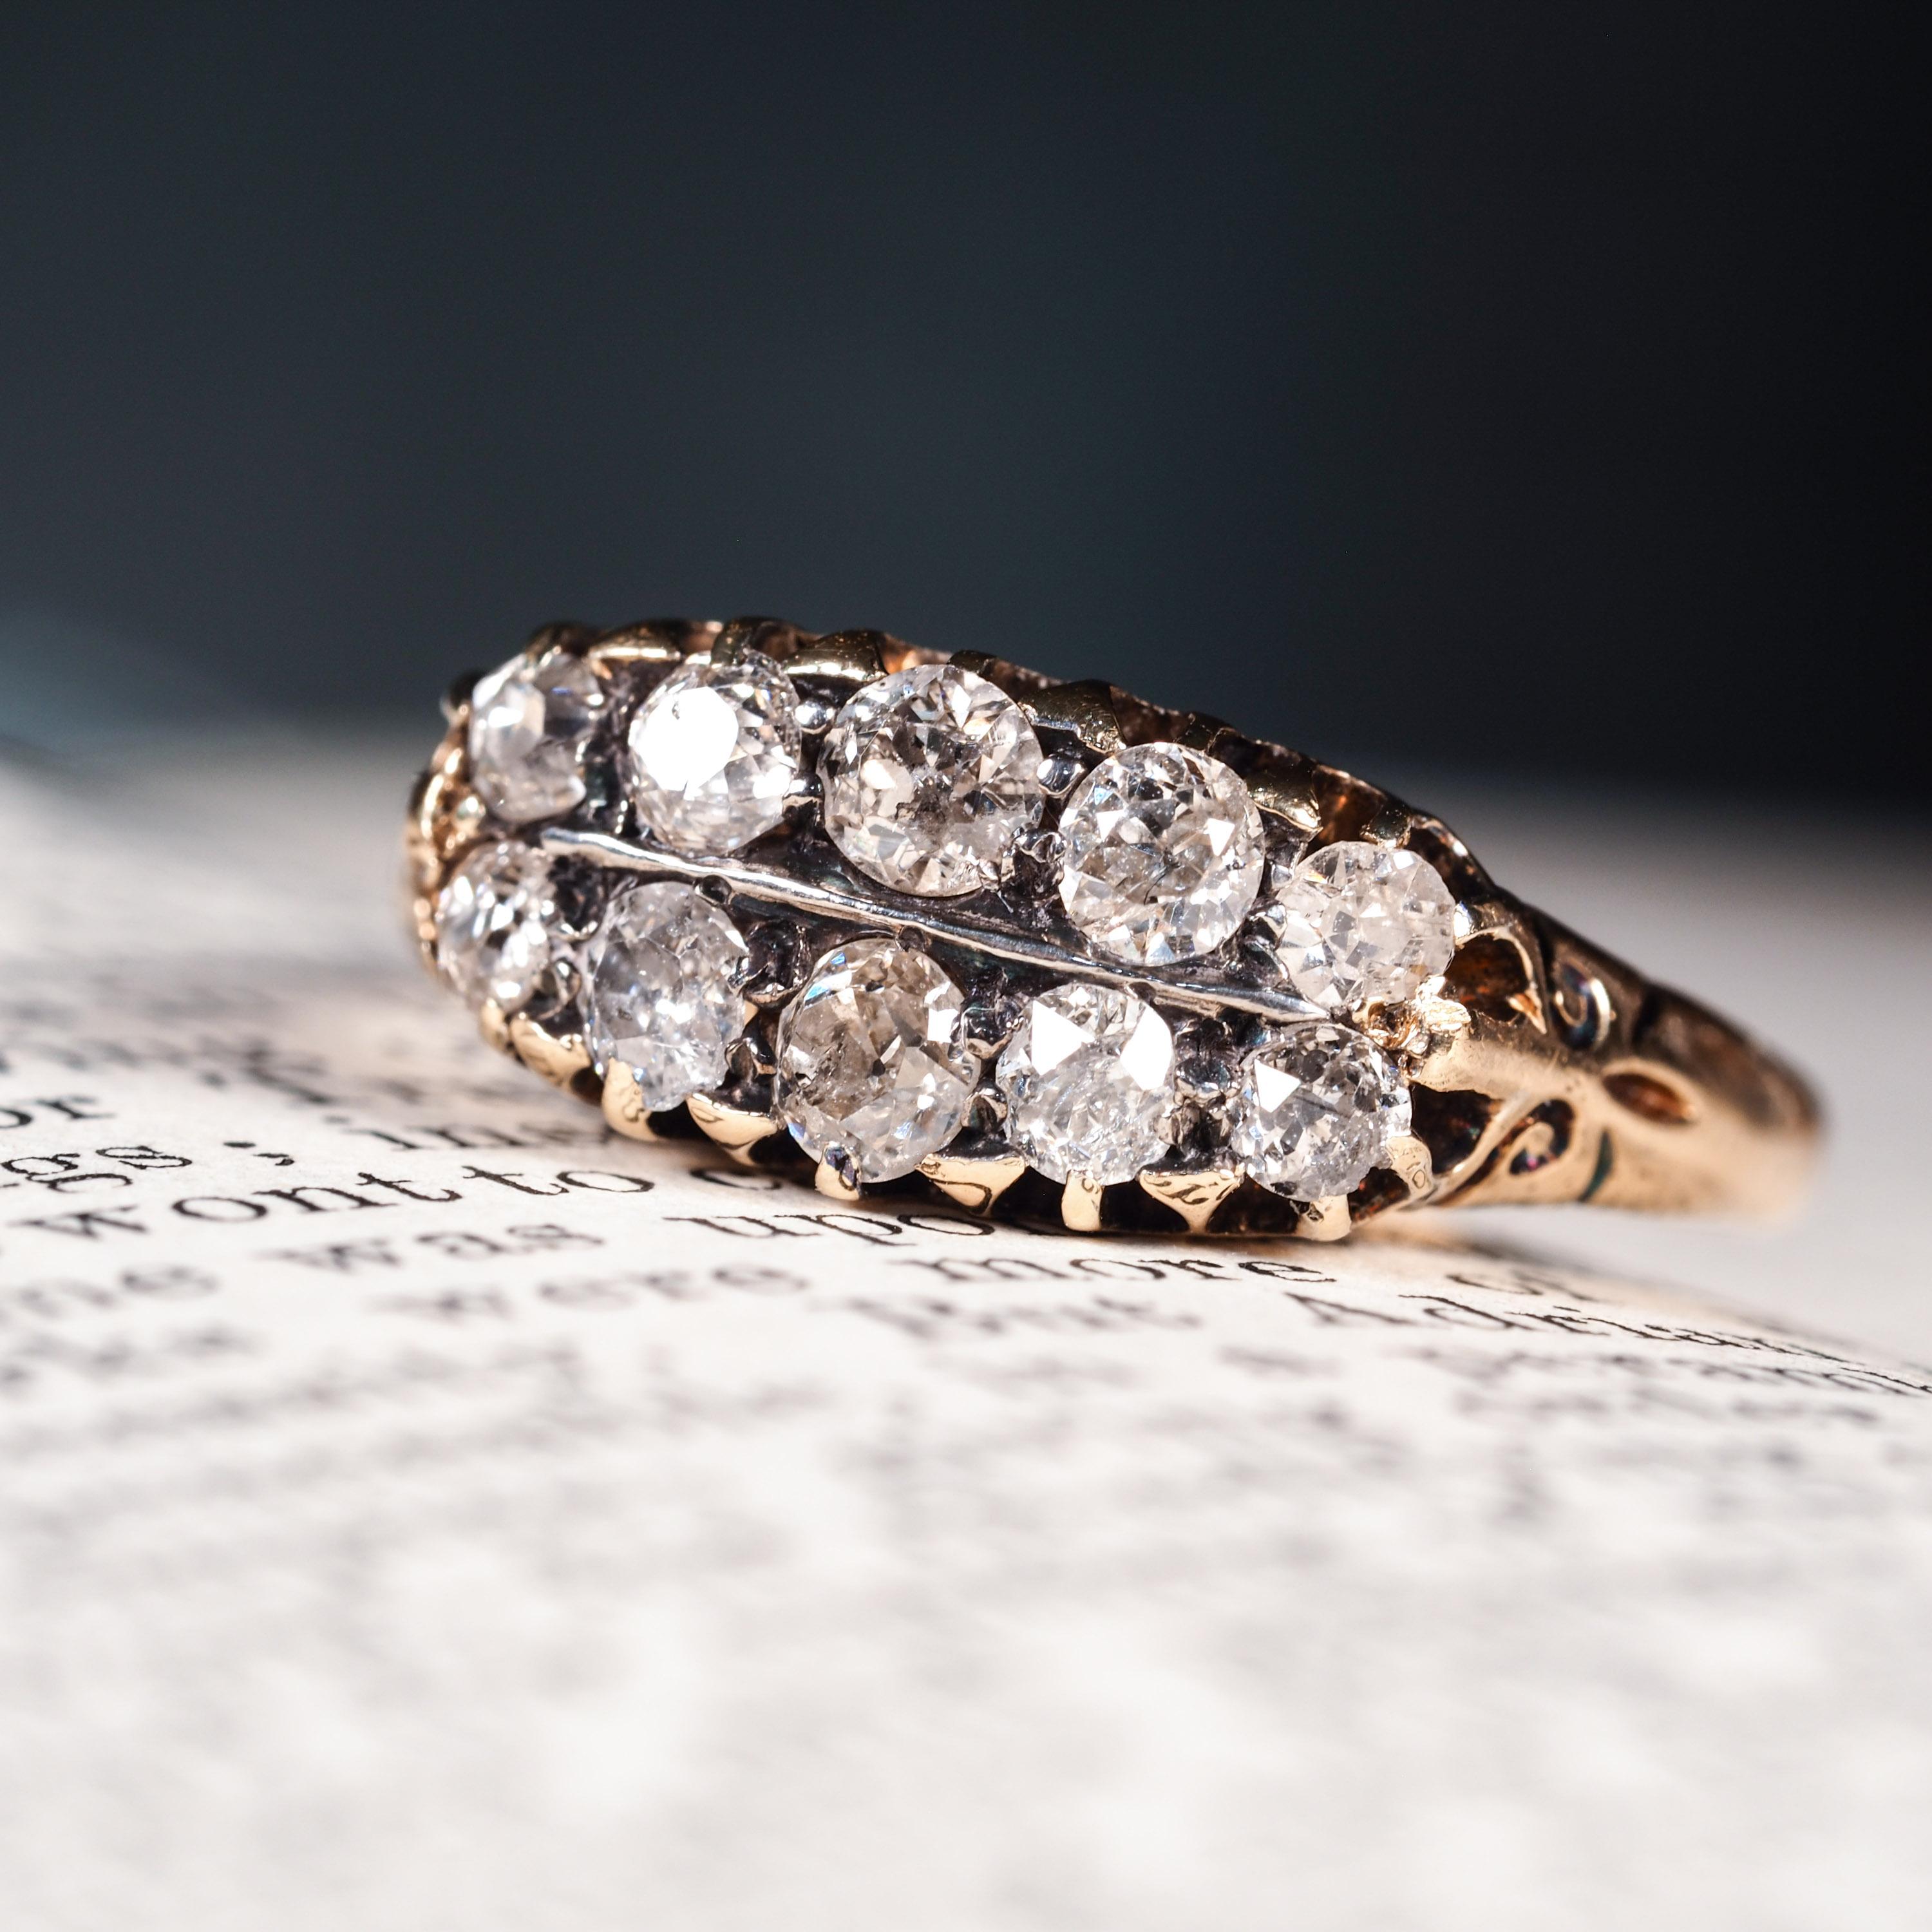 Women's or Men's Antique Victorian 18K Gold Diamond Ring Old Cut - Boat Shaped c.1890 For Sale